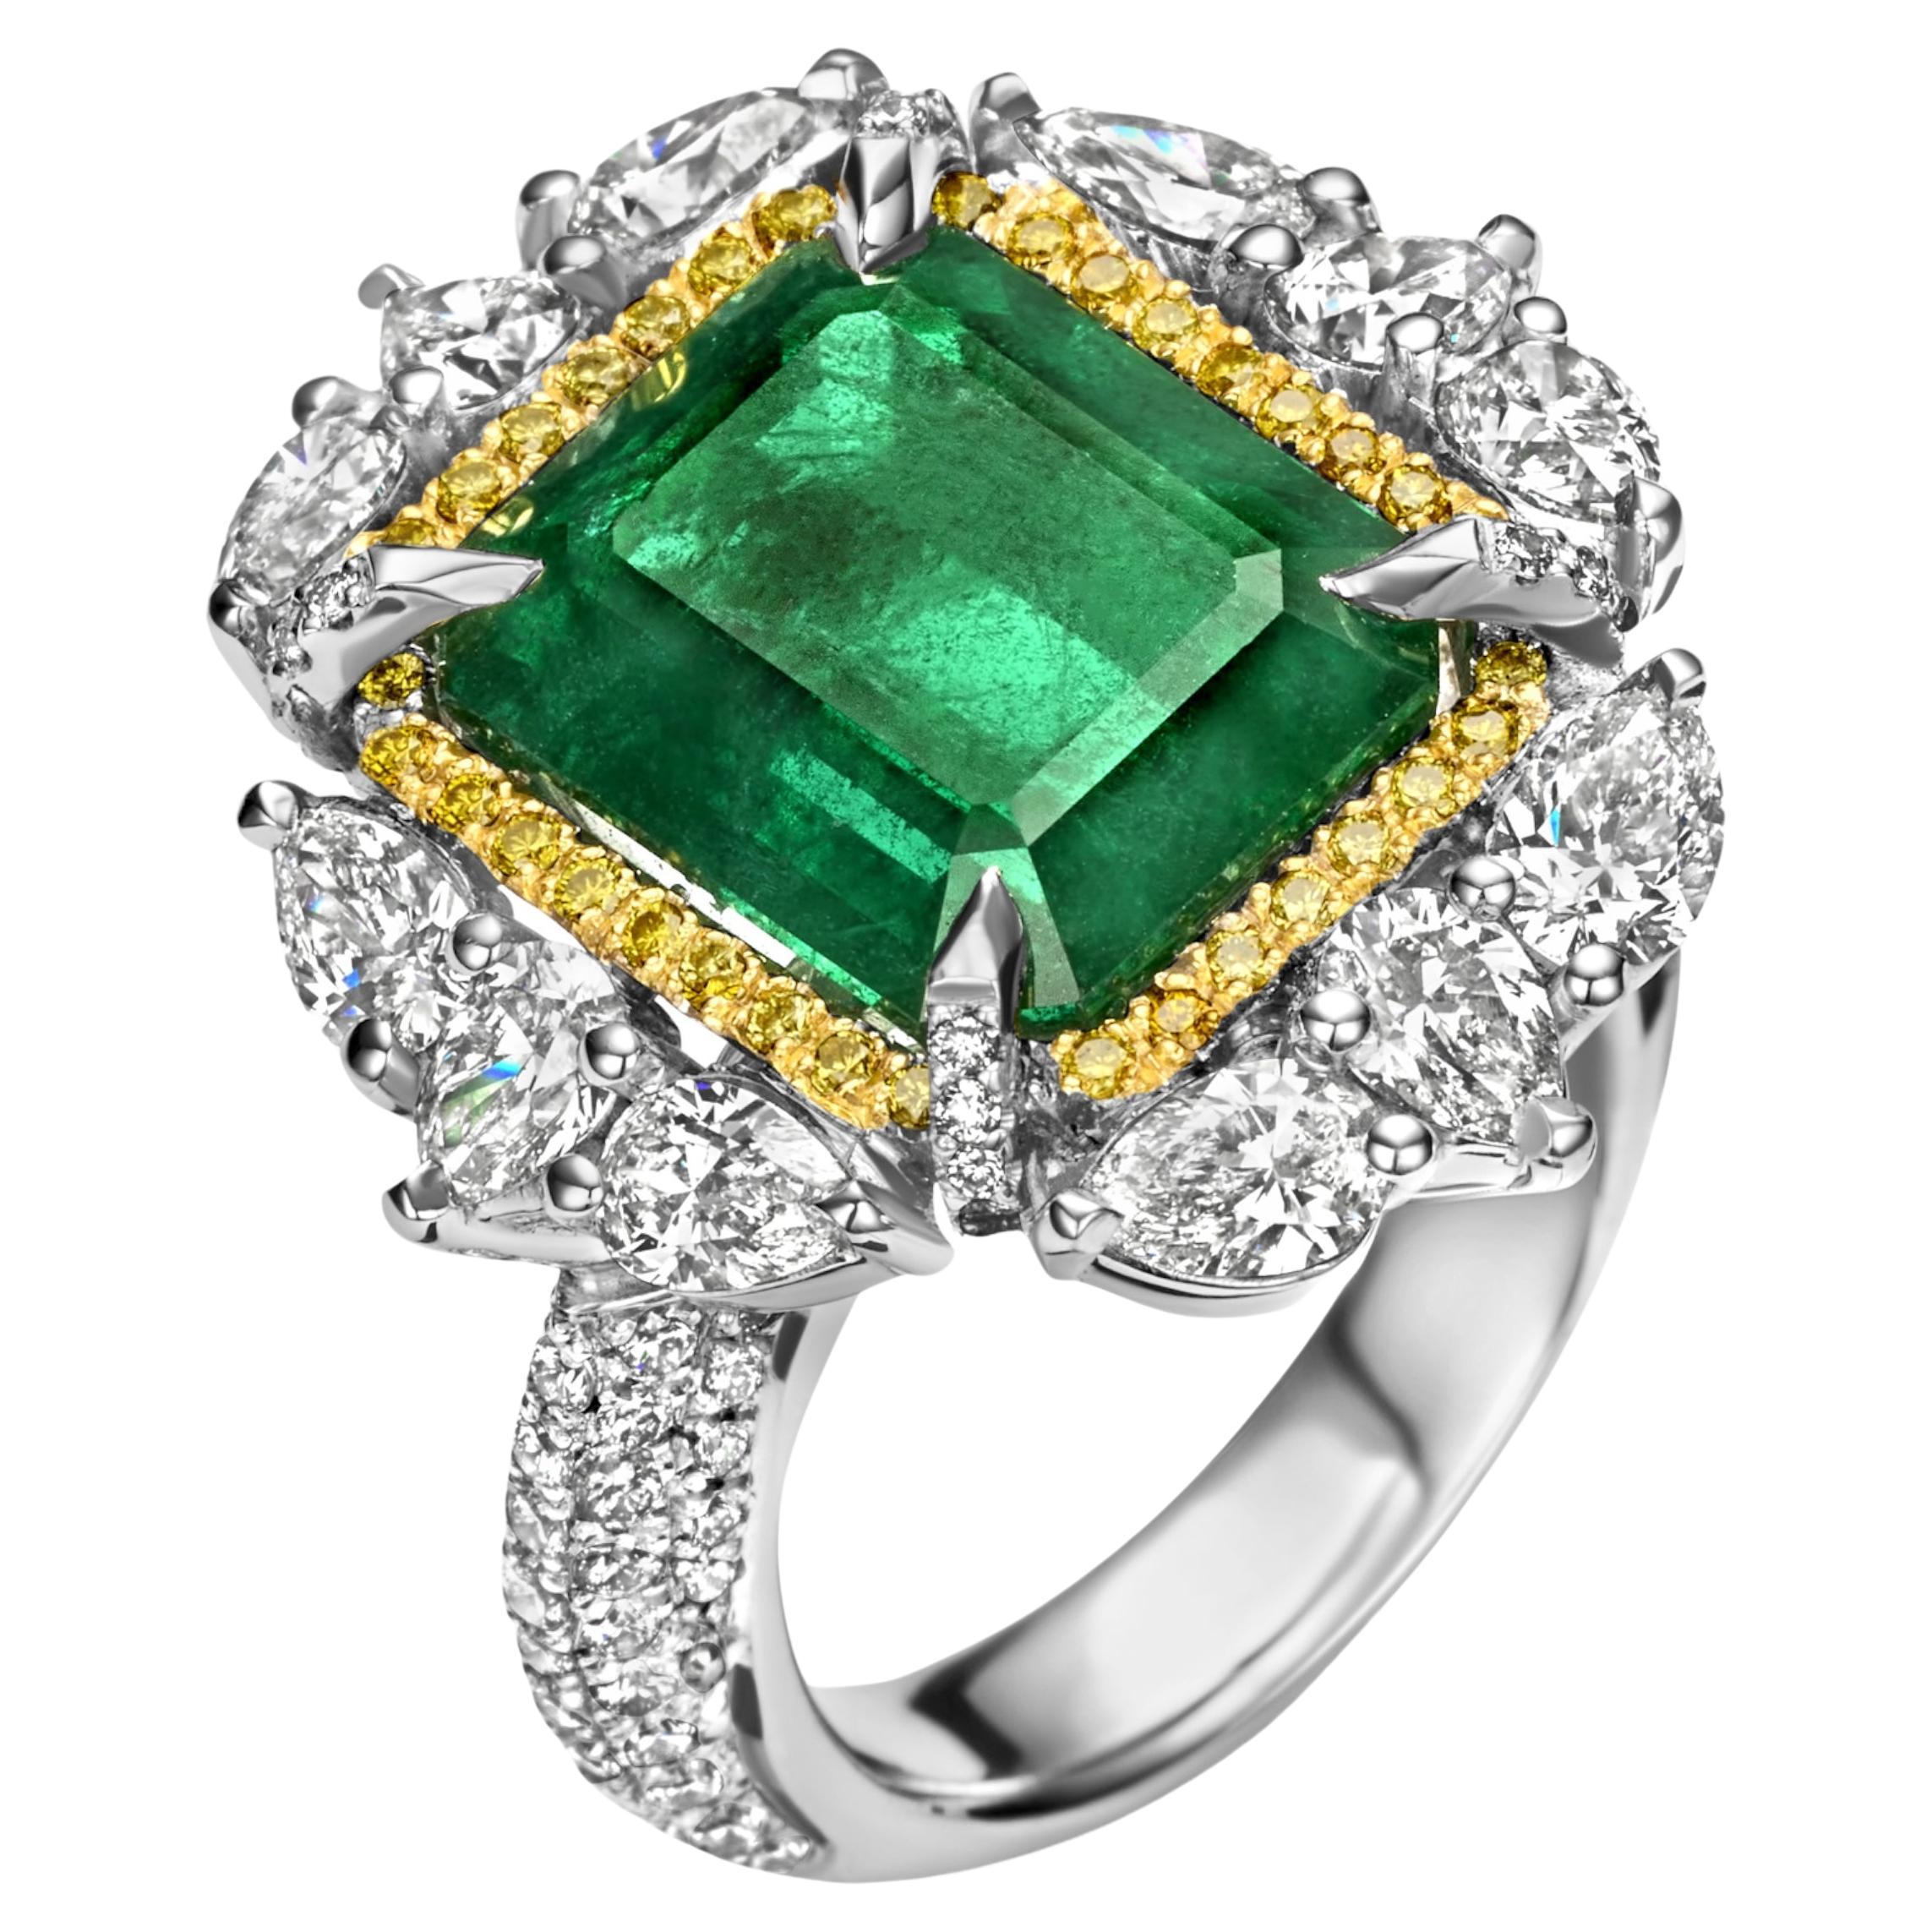 18 Karat White Gold Ring with 12.27 Carat Emerald, Pear Shape Diamonds 2.62 Ct For Sale